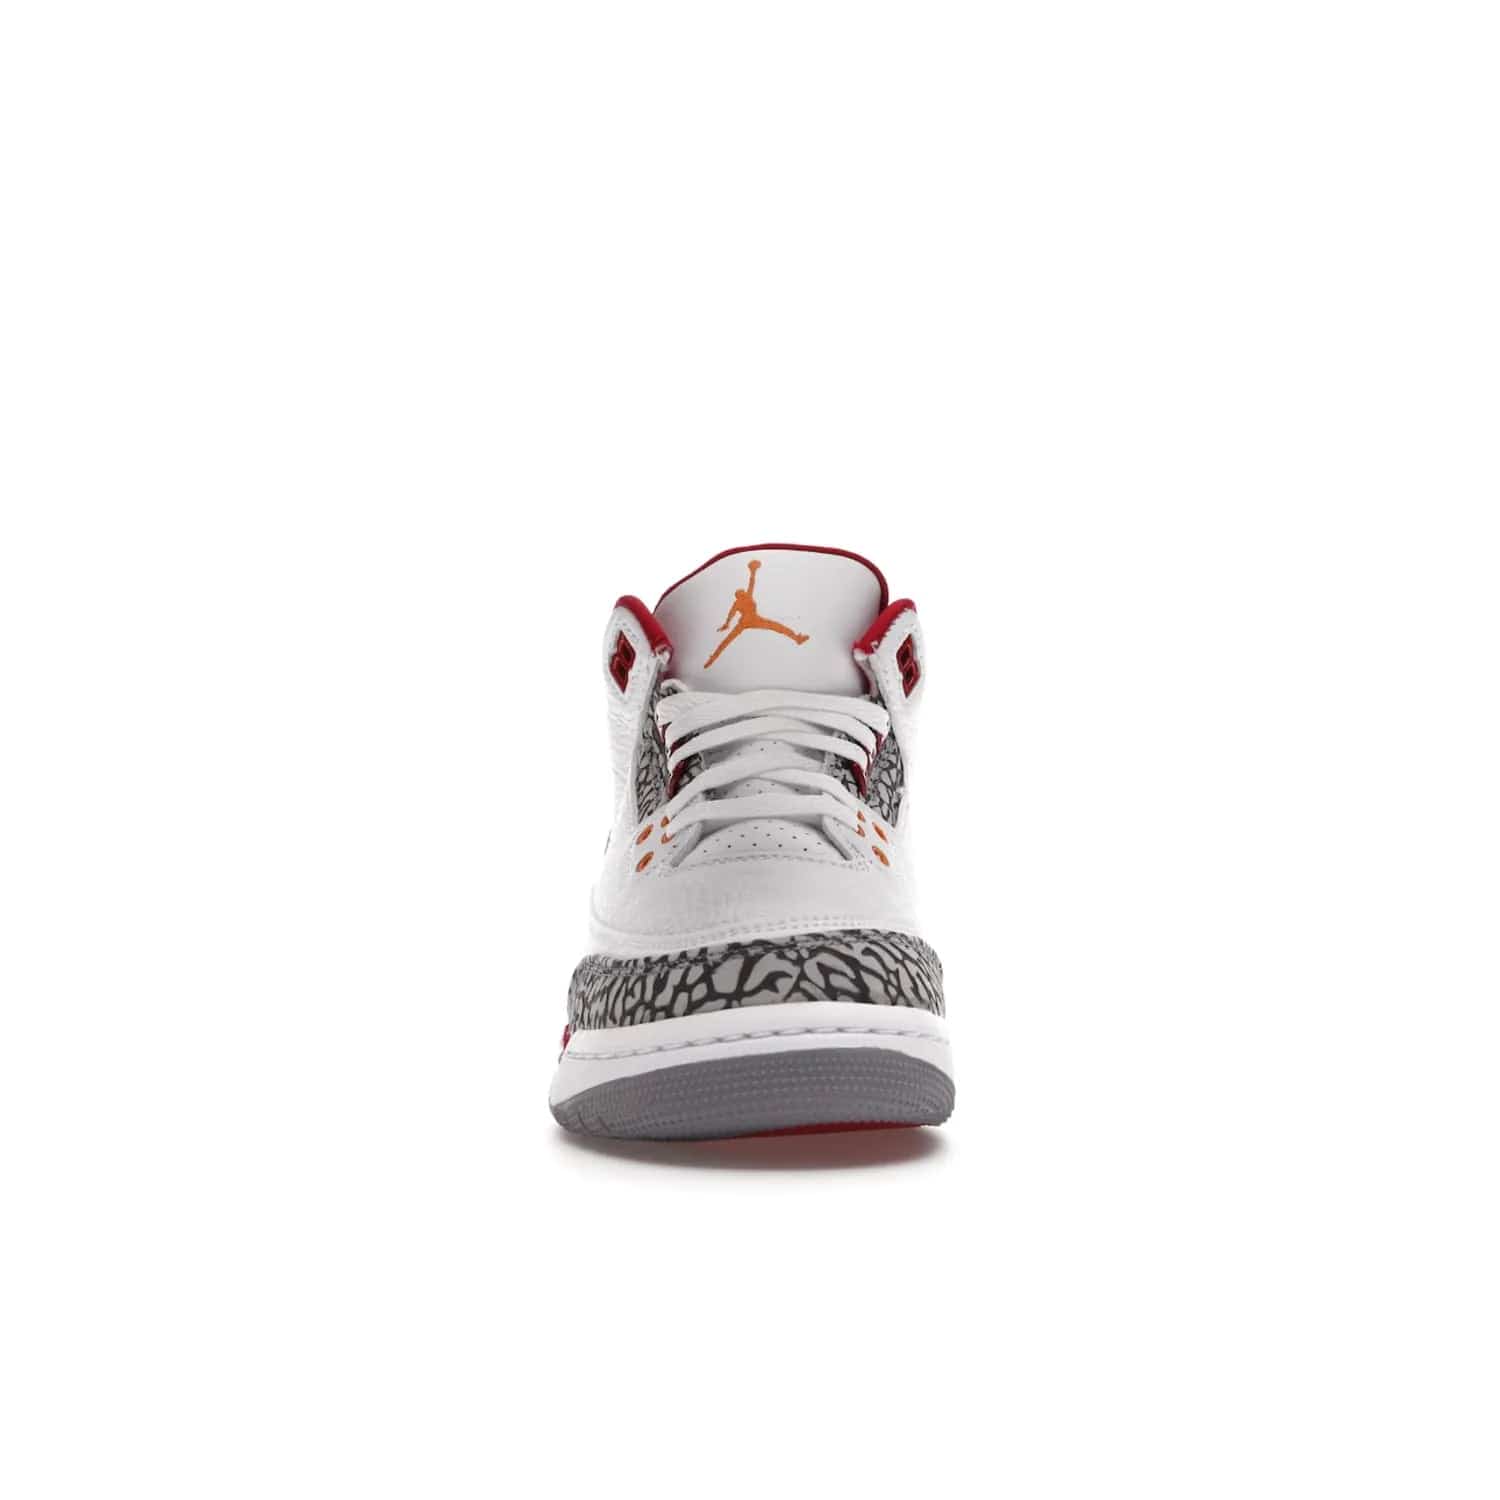 Jordan 3 Retro Cardinal (GS) - Image 10 - Only at www.BallersClubKickz.com - Shop the kid-sized Air Jordan 3 Retro Cardinal GS, released Feb 2022. White tumbled leather upper, light curry accenting, cement grey and classic red details throughout. Visible Air cushioning, midsole, and an eye-catching outsole. Show off your style with this fashionable streetwear silhouette.